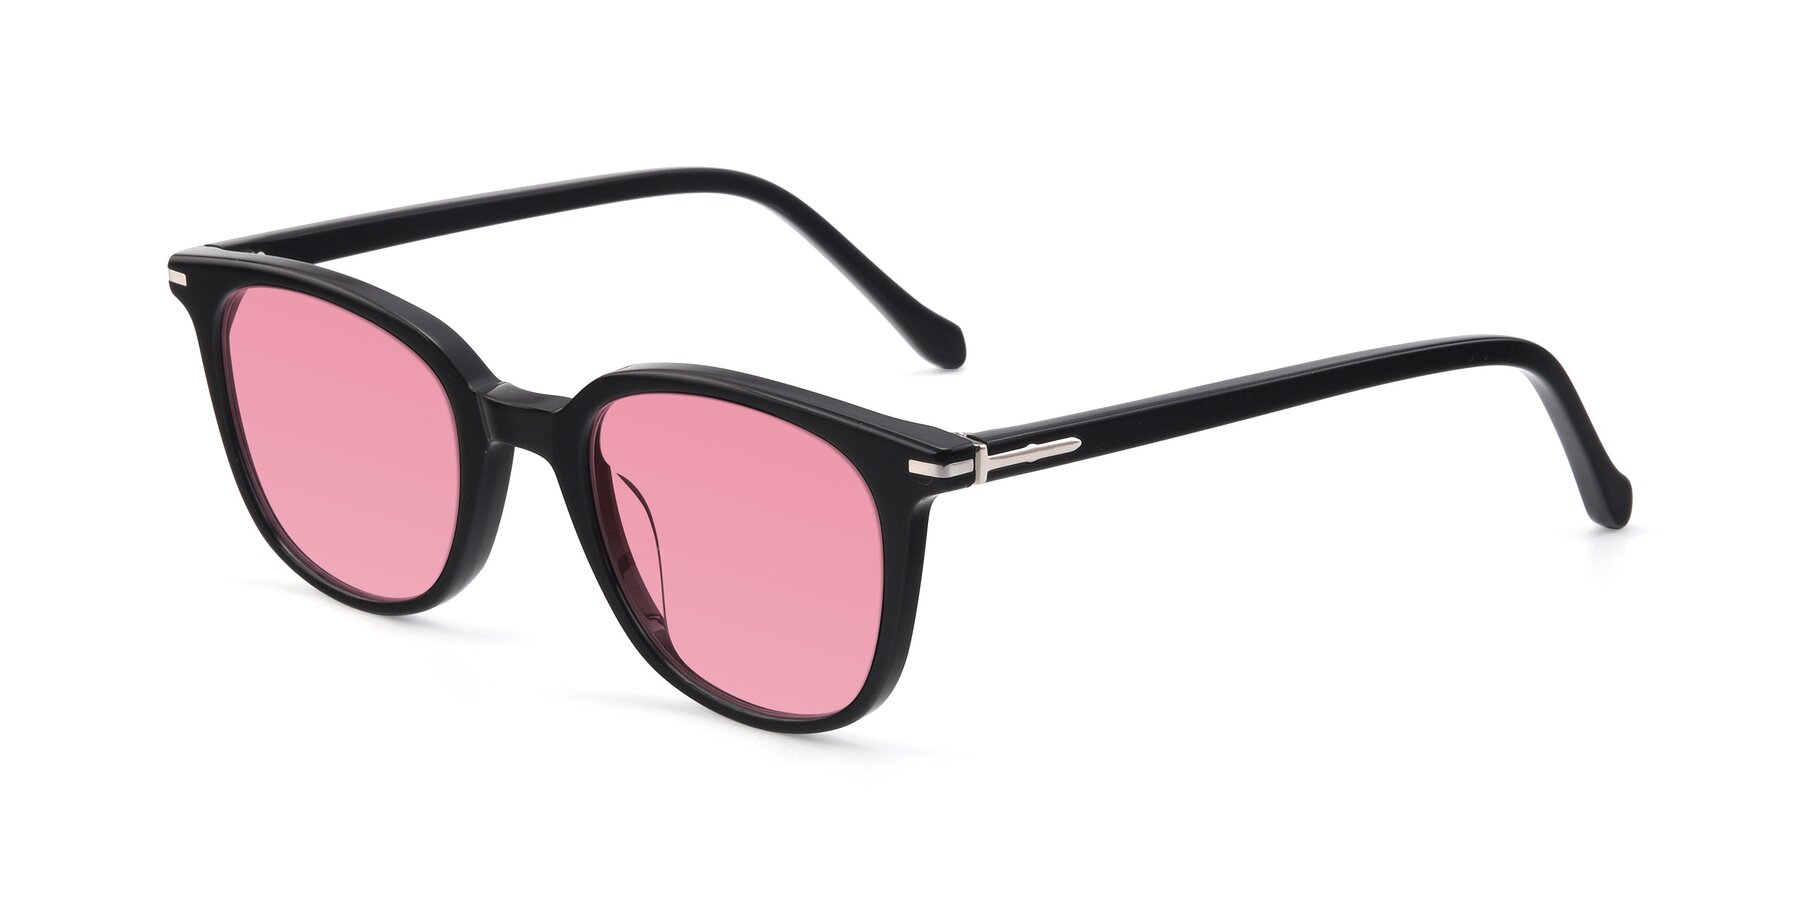 Angle of 17562 in Black with Pink Tinted Lenses